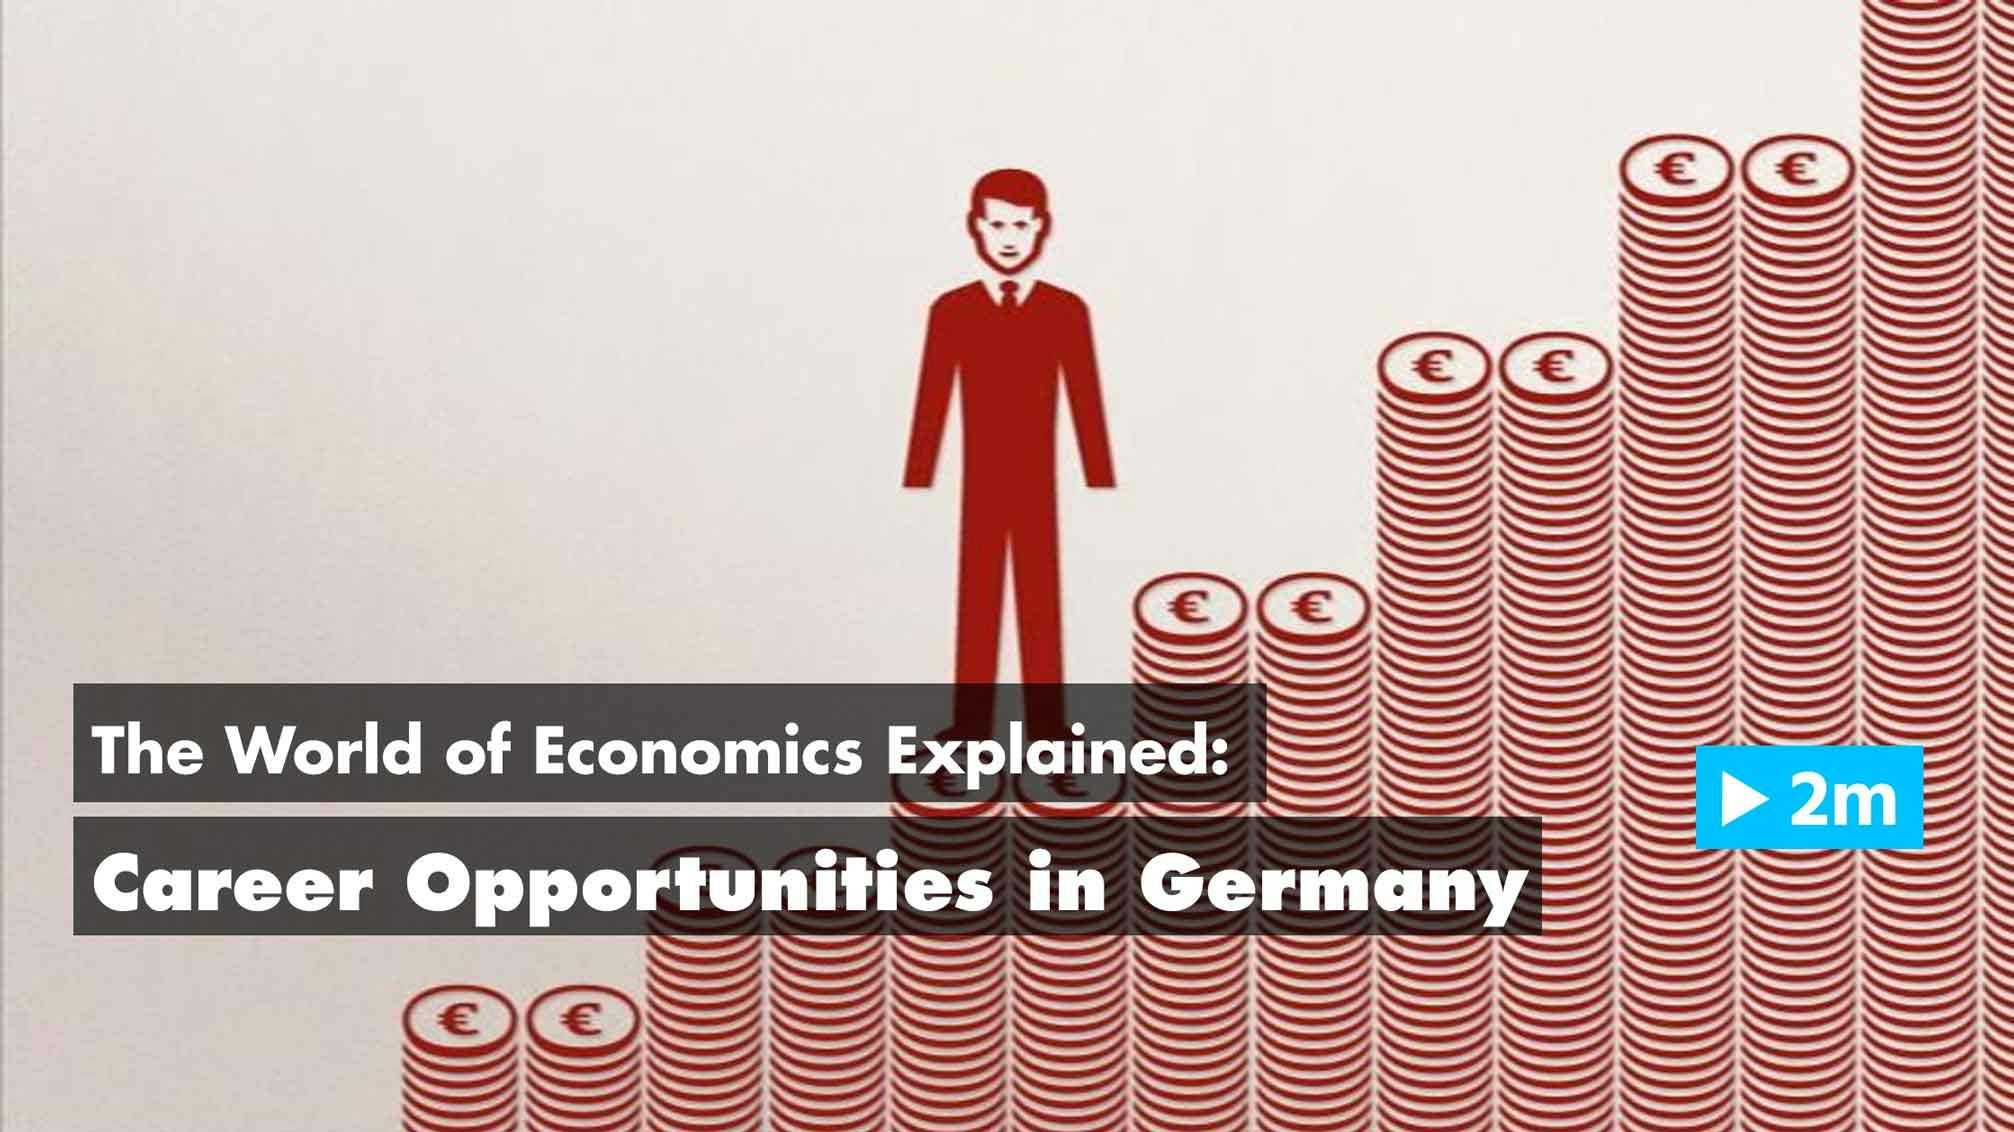 The World of Economics Explained: Career opportunities in Germany